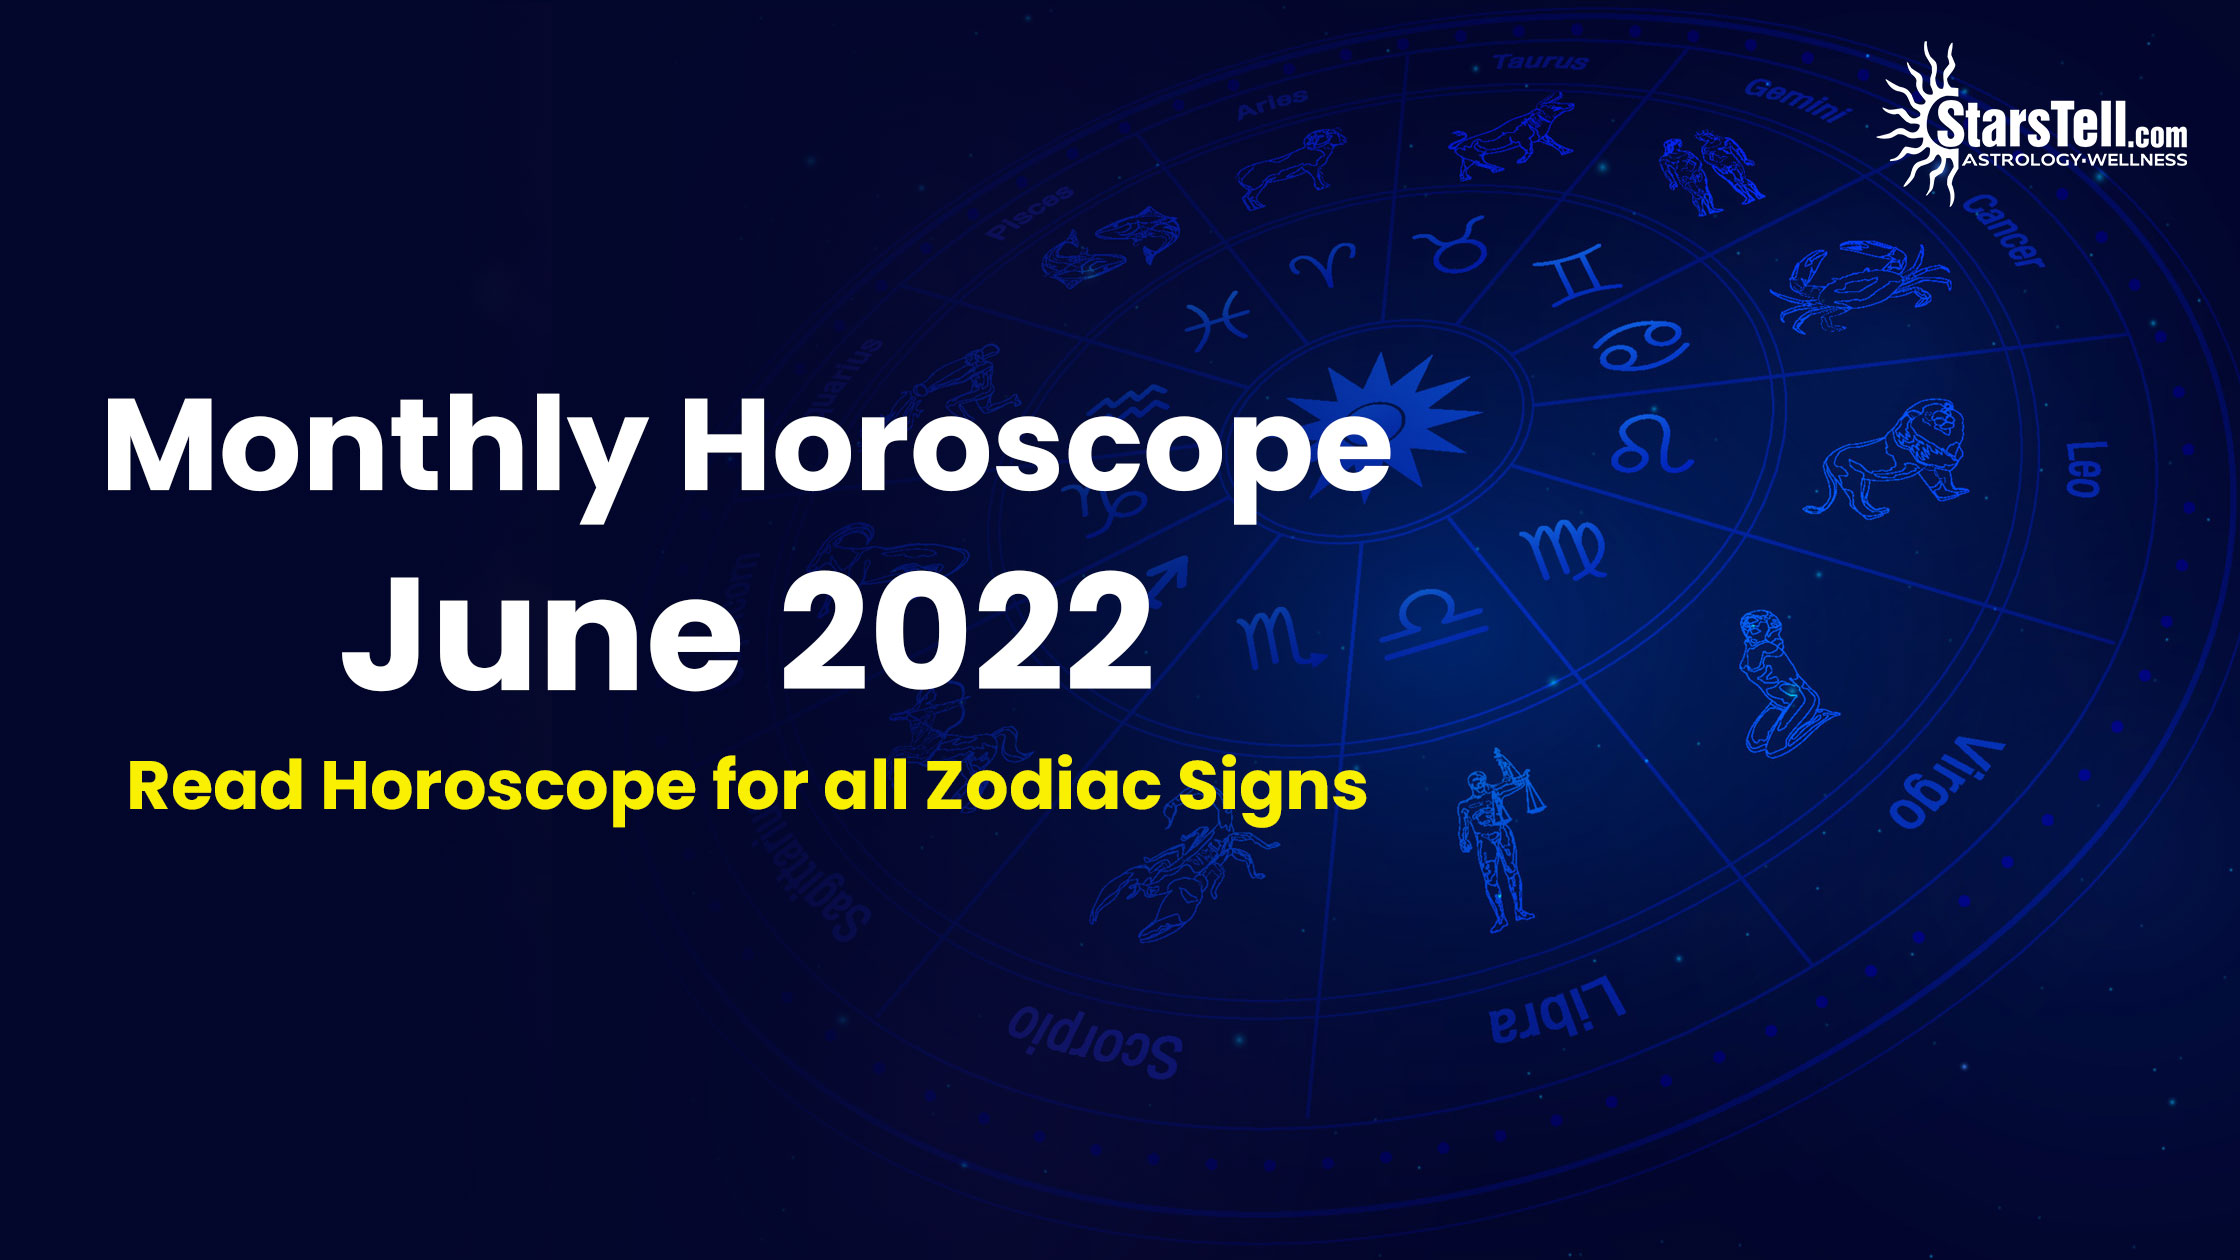 Monthly Horoscope June 2022 - Read Horoscope for all zodiac signs